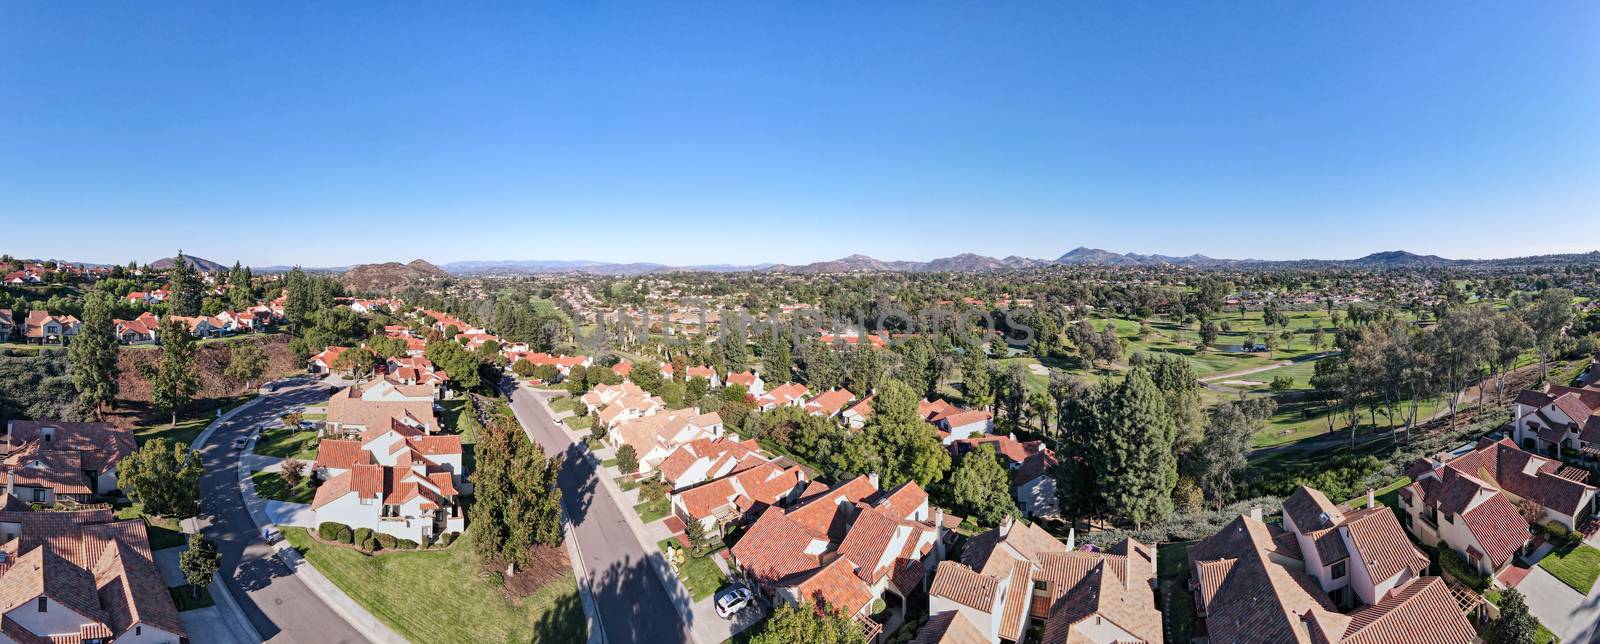 Aerial view of middle class neighborhood with residential house community in Rancho Bernardo during autumn season, South California, USA.